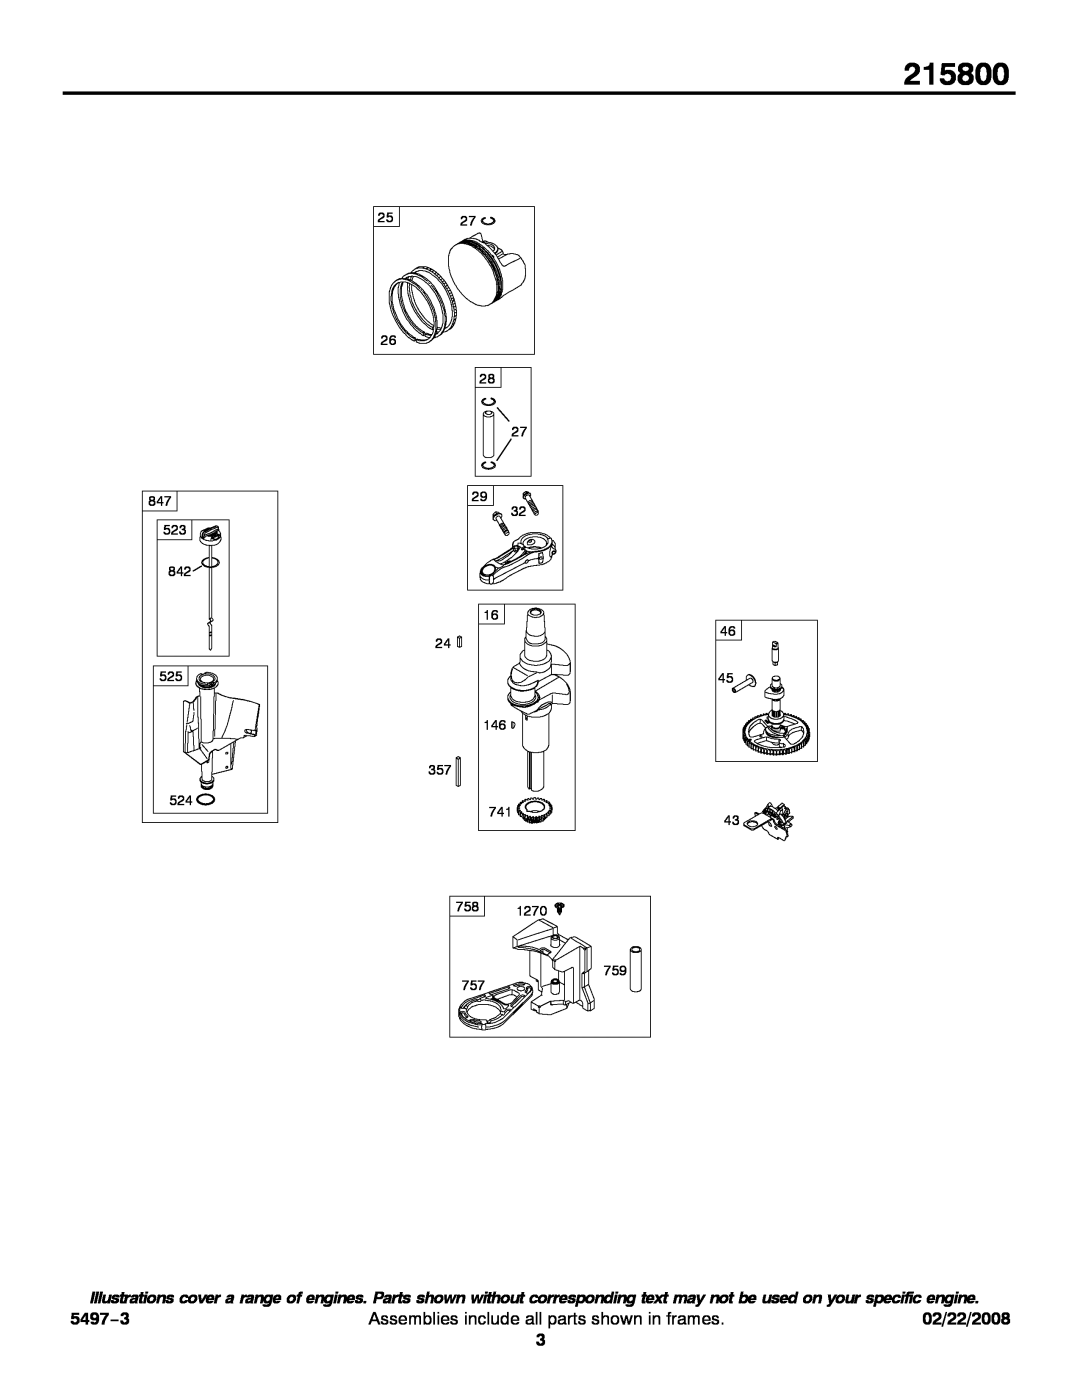 Briggs & Stratton 215800 service manual 5497−3, Assemblies include all parts shown in frames, 02/22/2008 